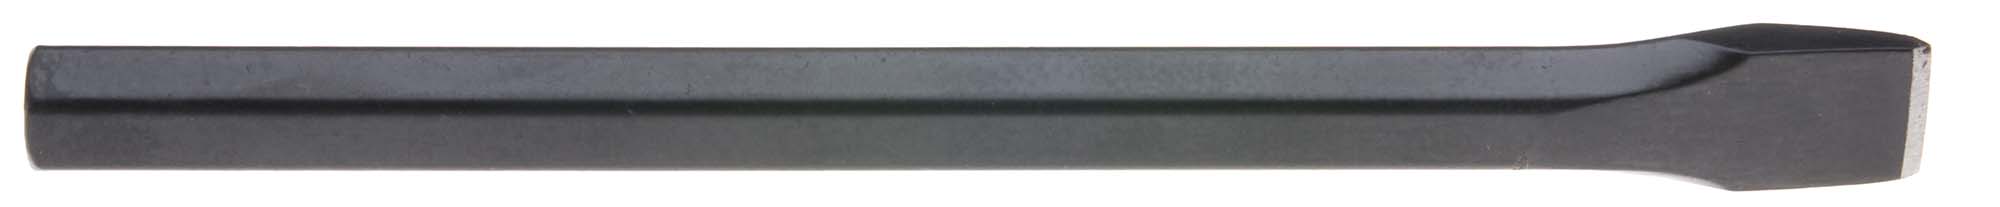 1-1/8" Cold Chisel